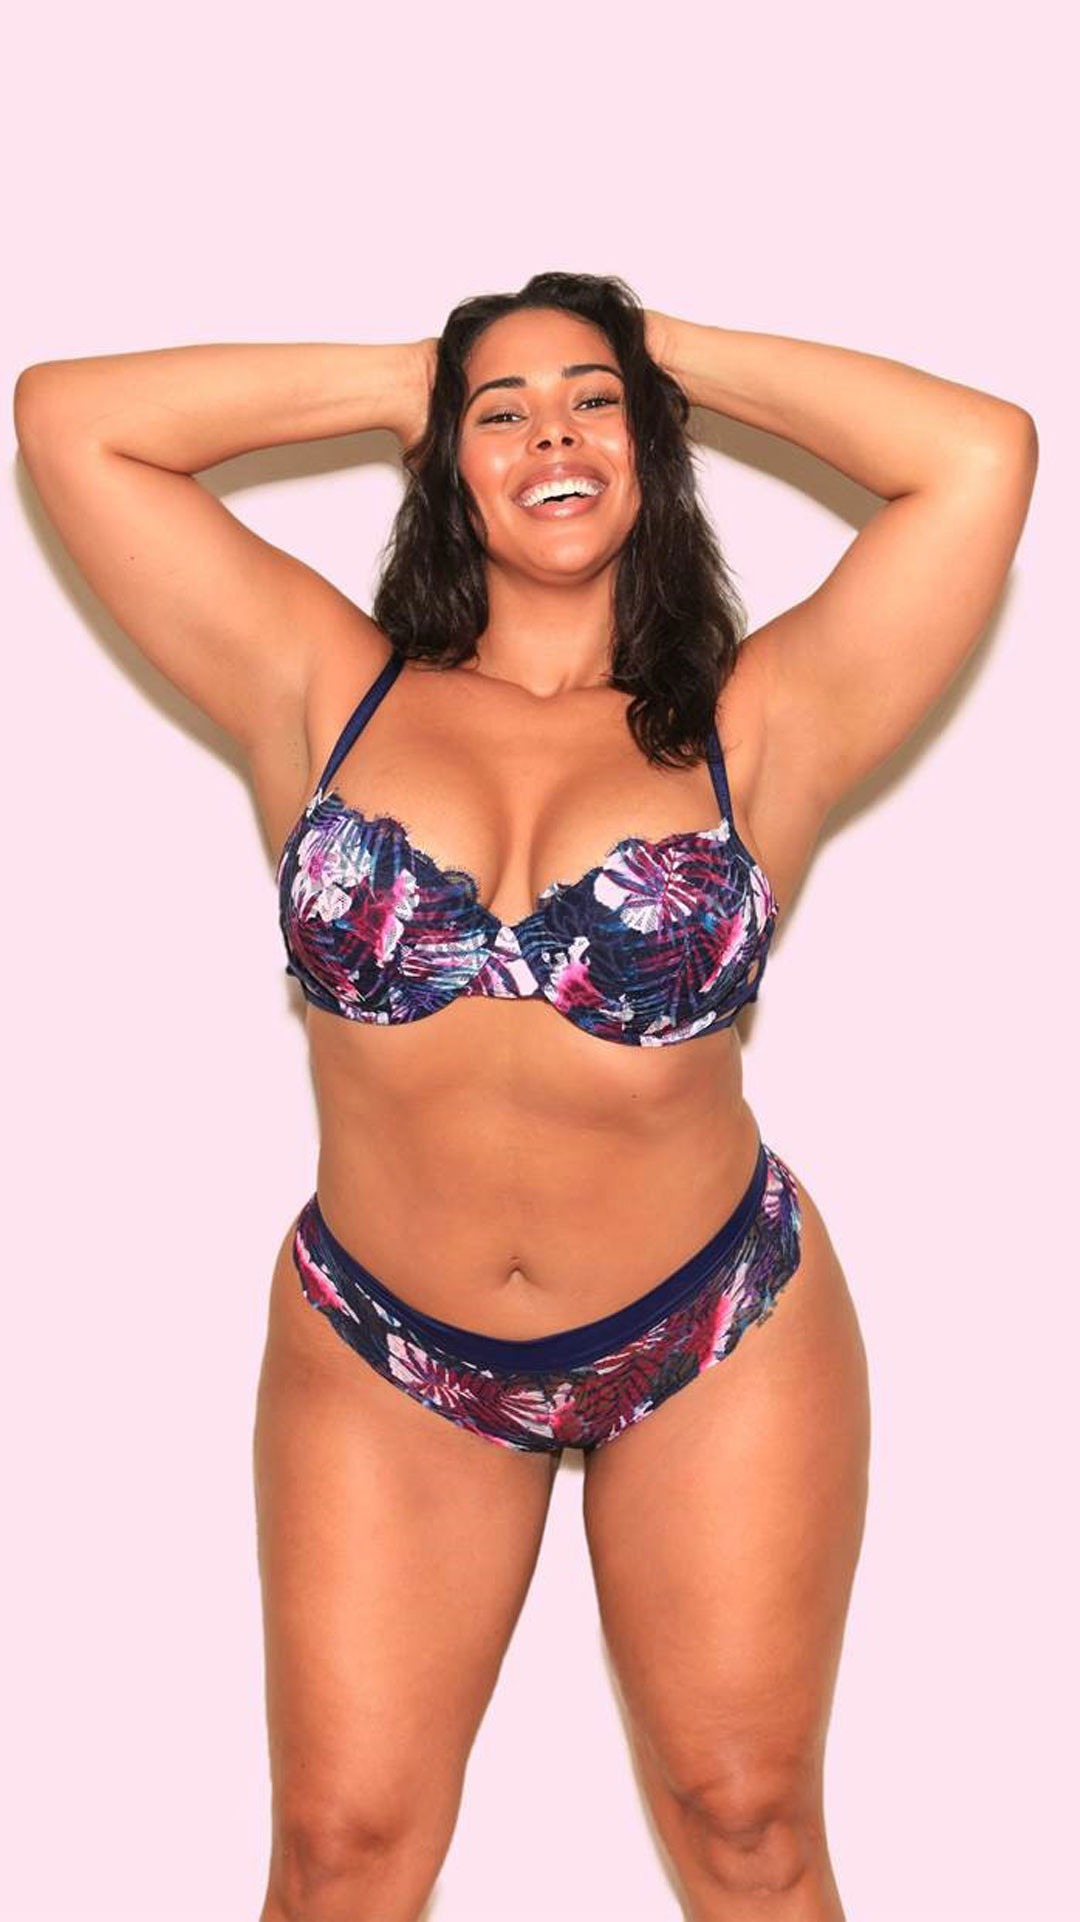 This Plus-Size Model Recreated Victoria's Secret Ads and ...